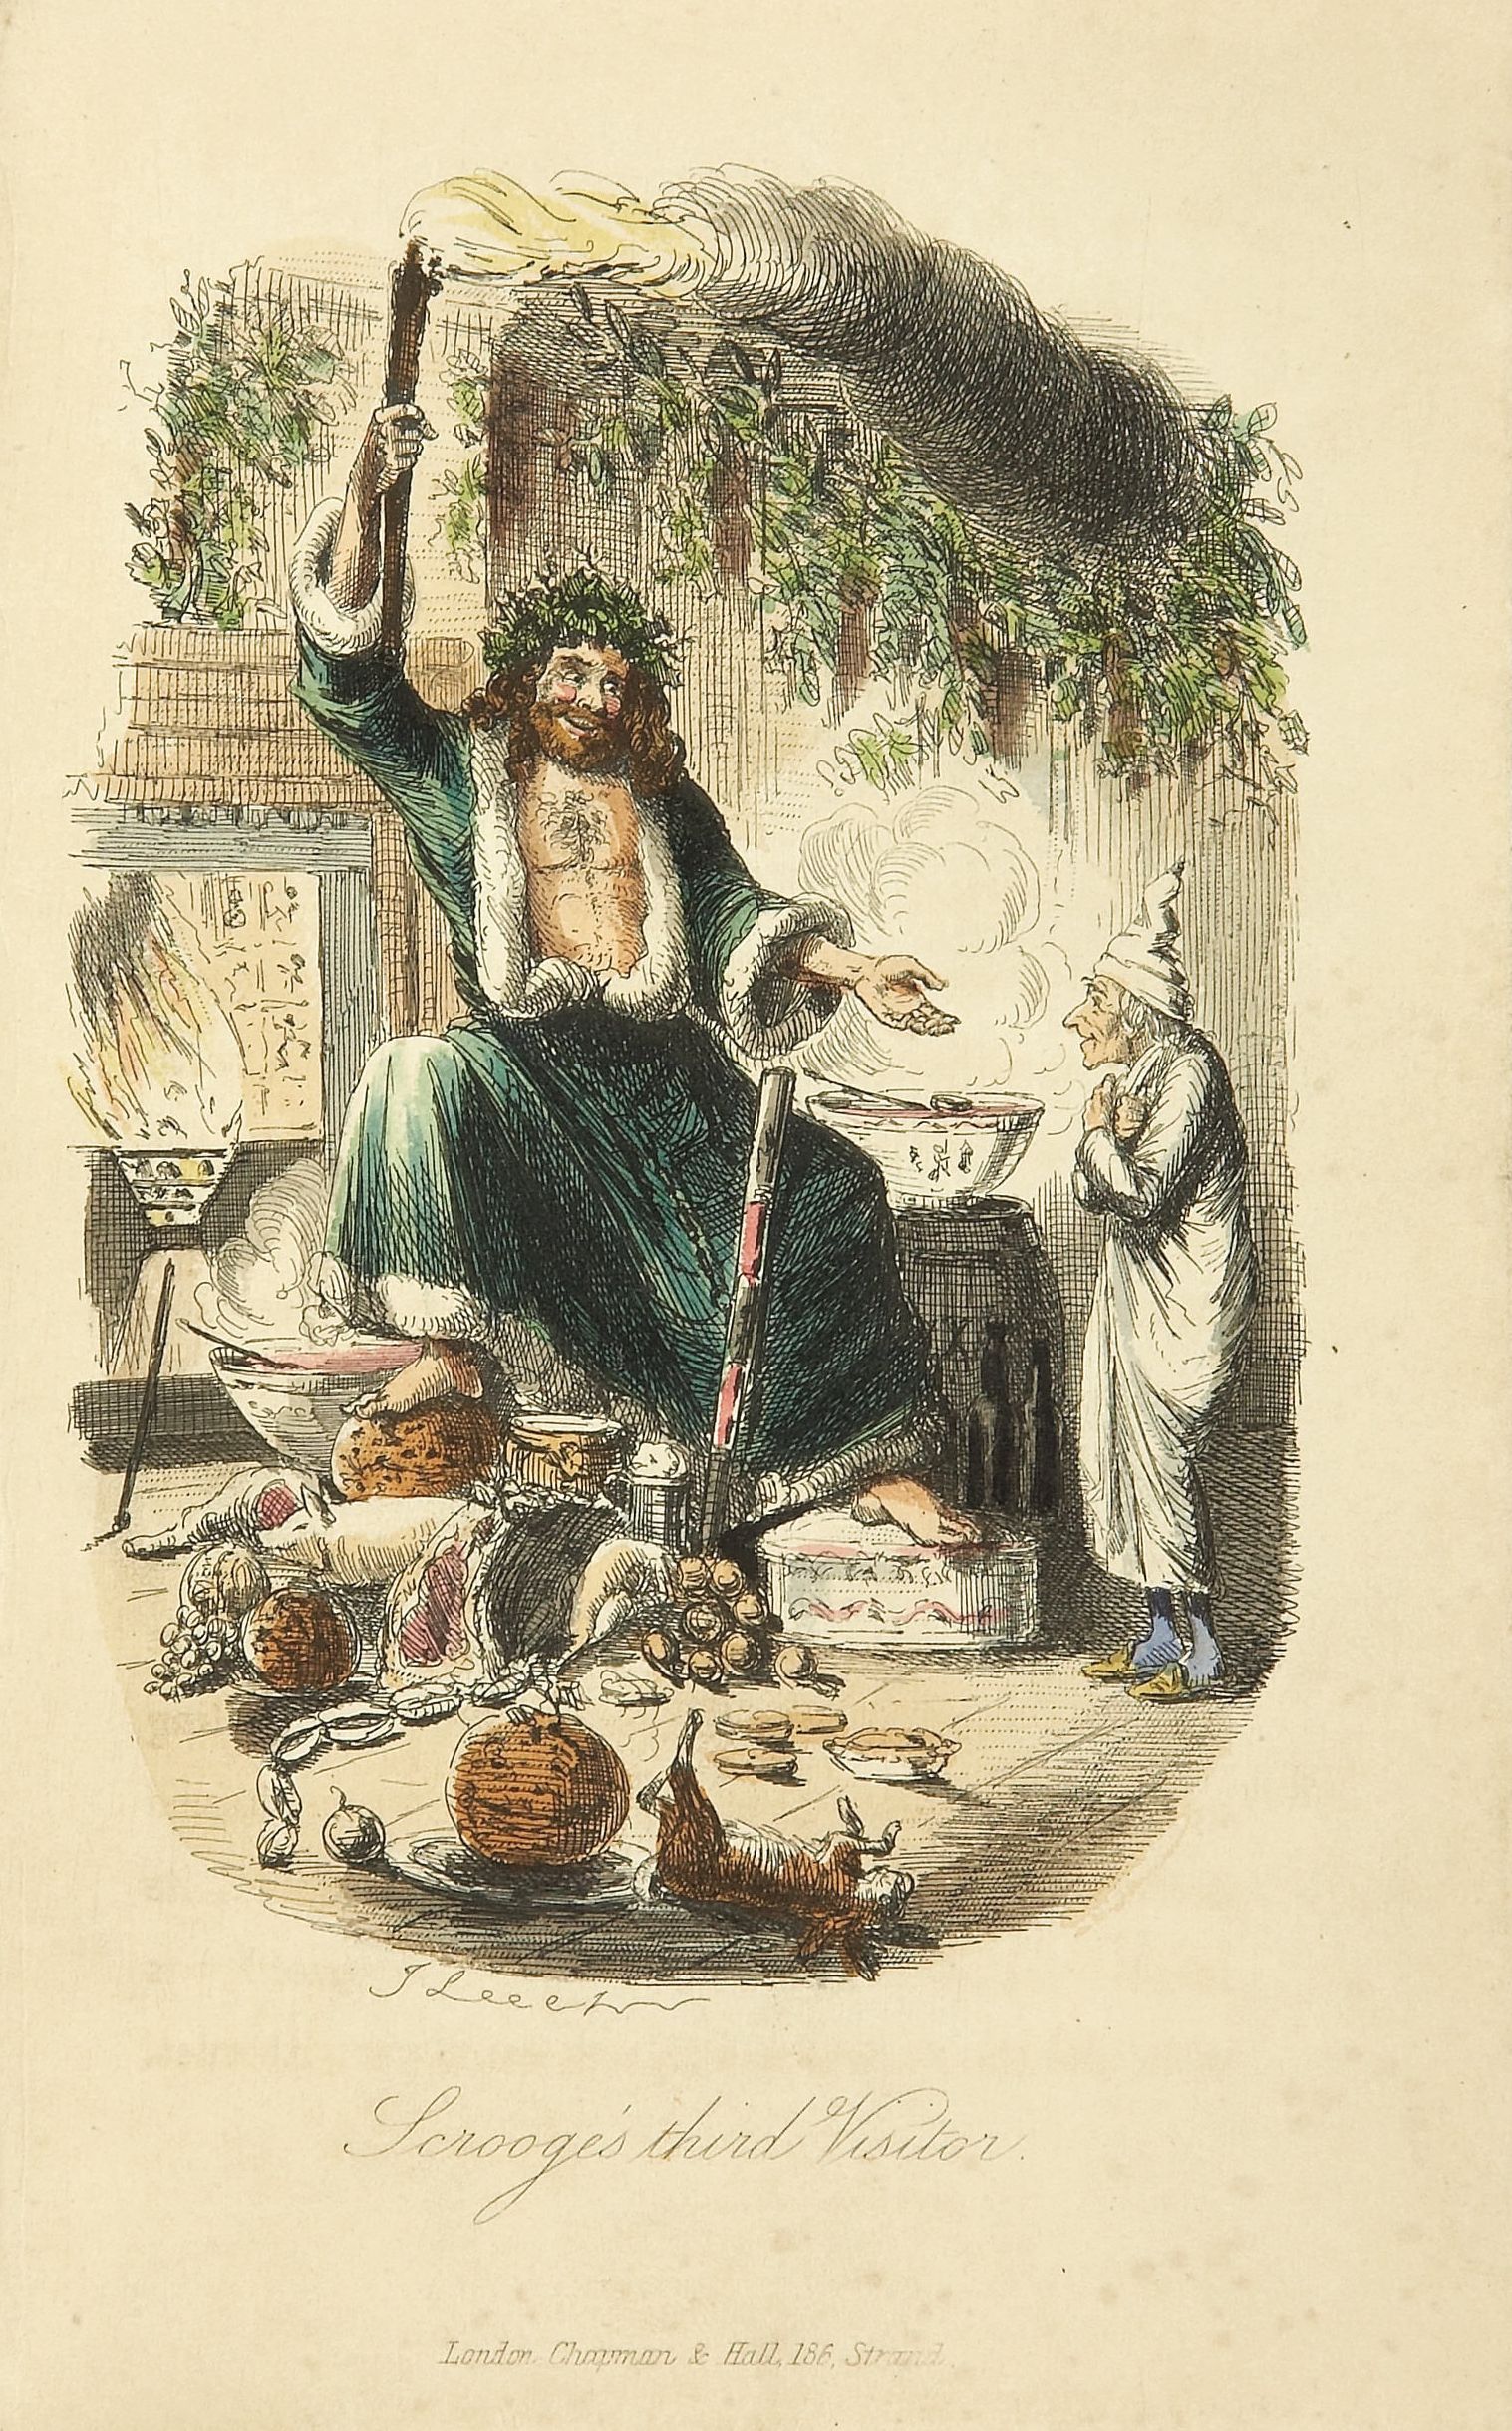 Pictured: Scrooge's third visitor, from Charles Dickens: A Christmas Carol. In Prose. Being a Ghost Story of Christmas. Illustrations by John Leech. London: Chapman & Hall, 1843. First edition. [CC BY-SA 3.0] via Wikimedia Commons.